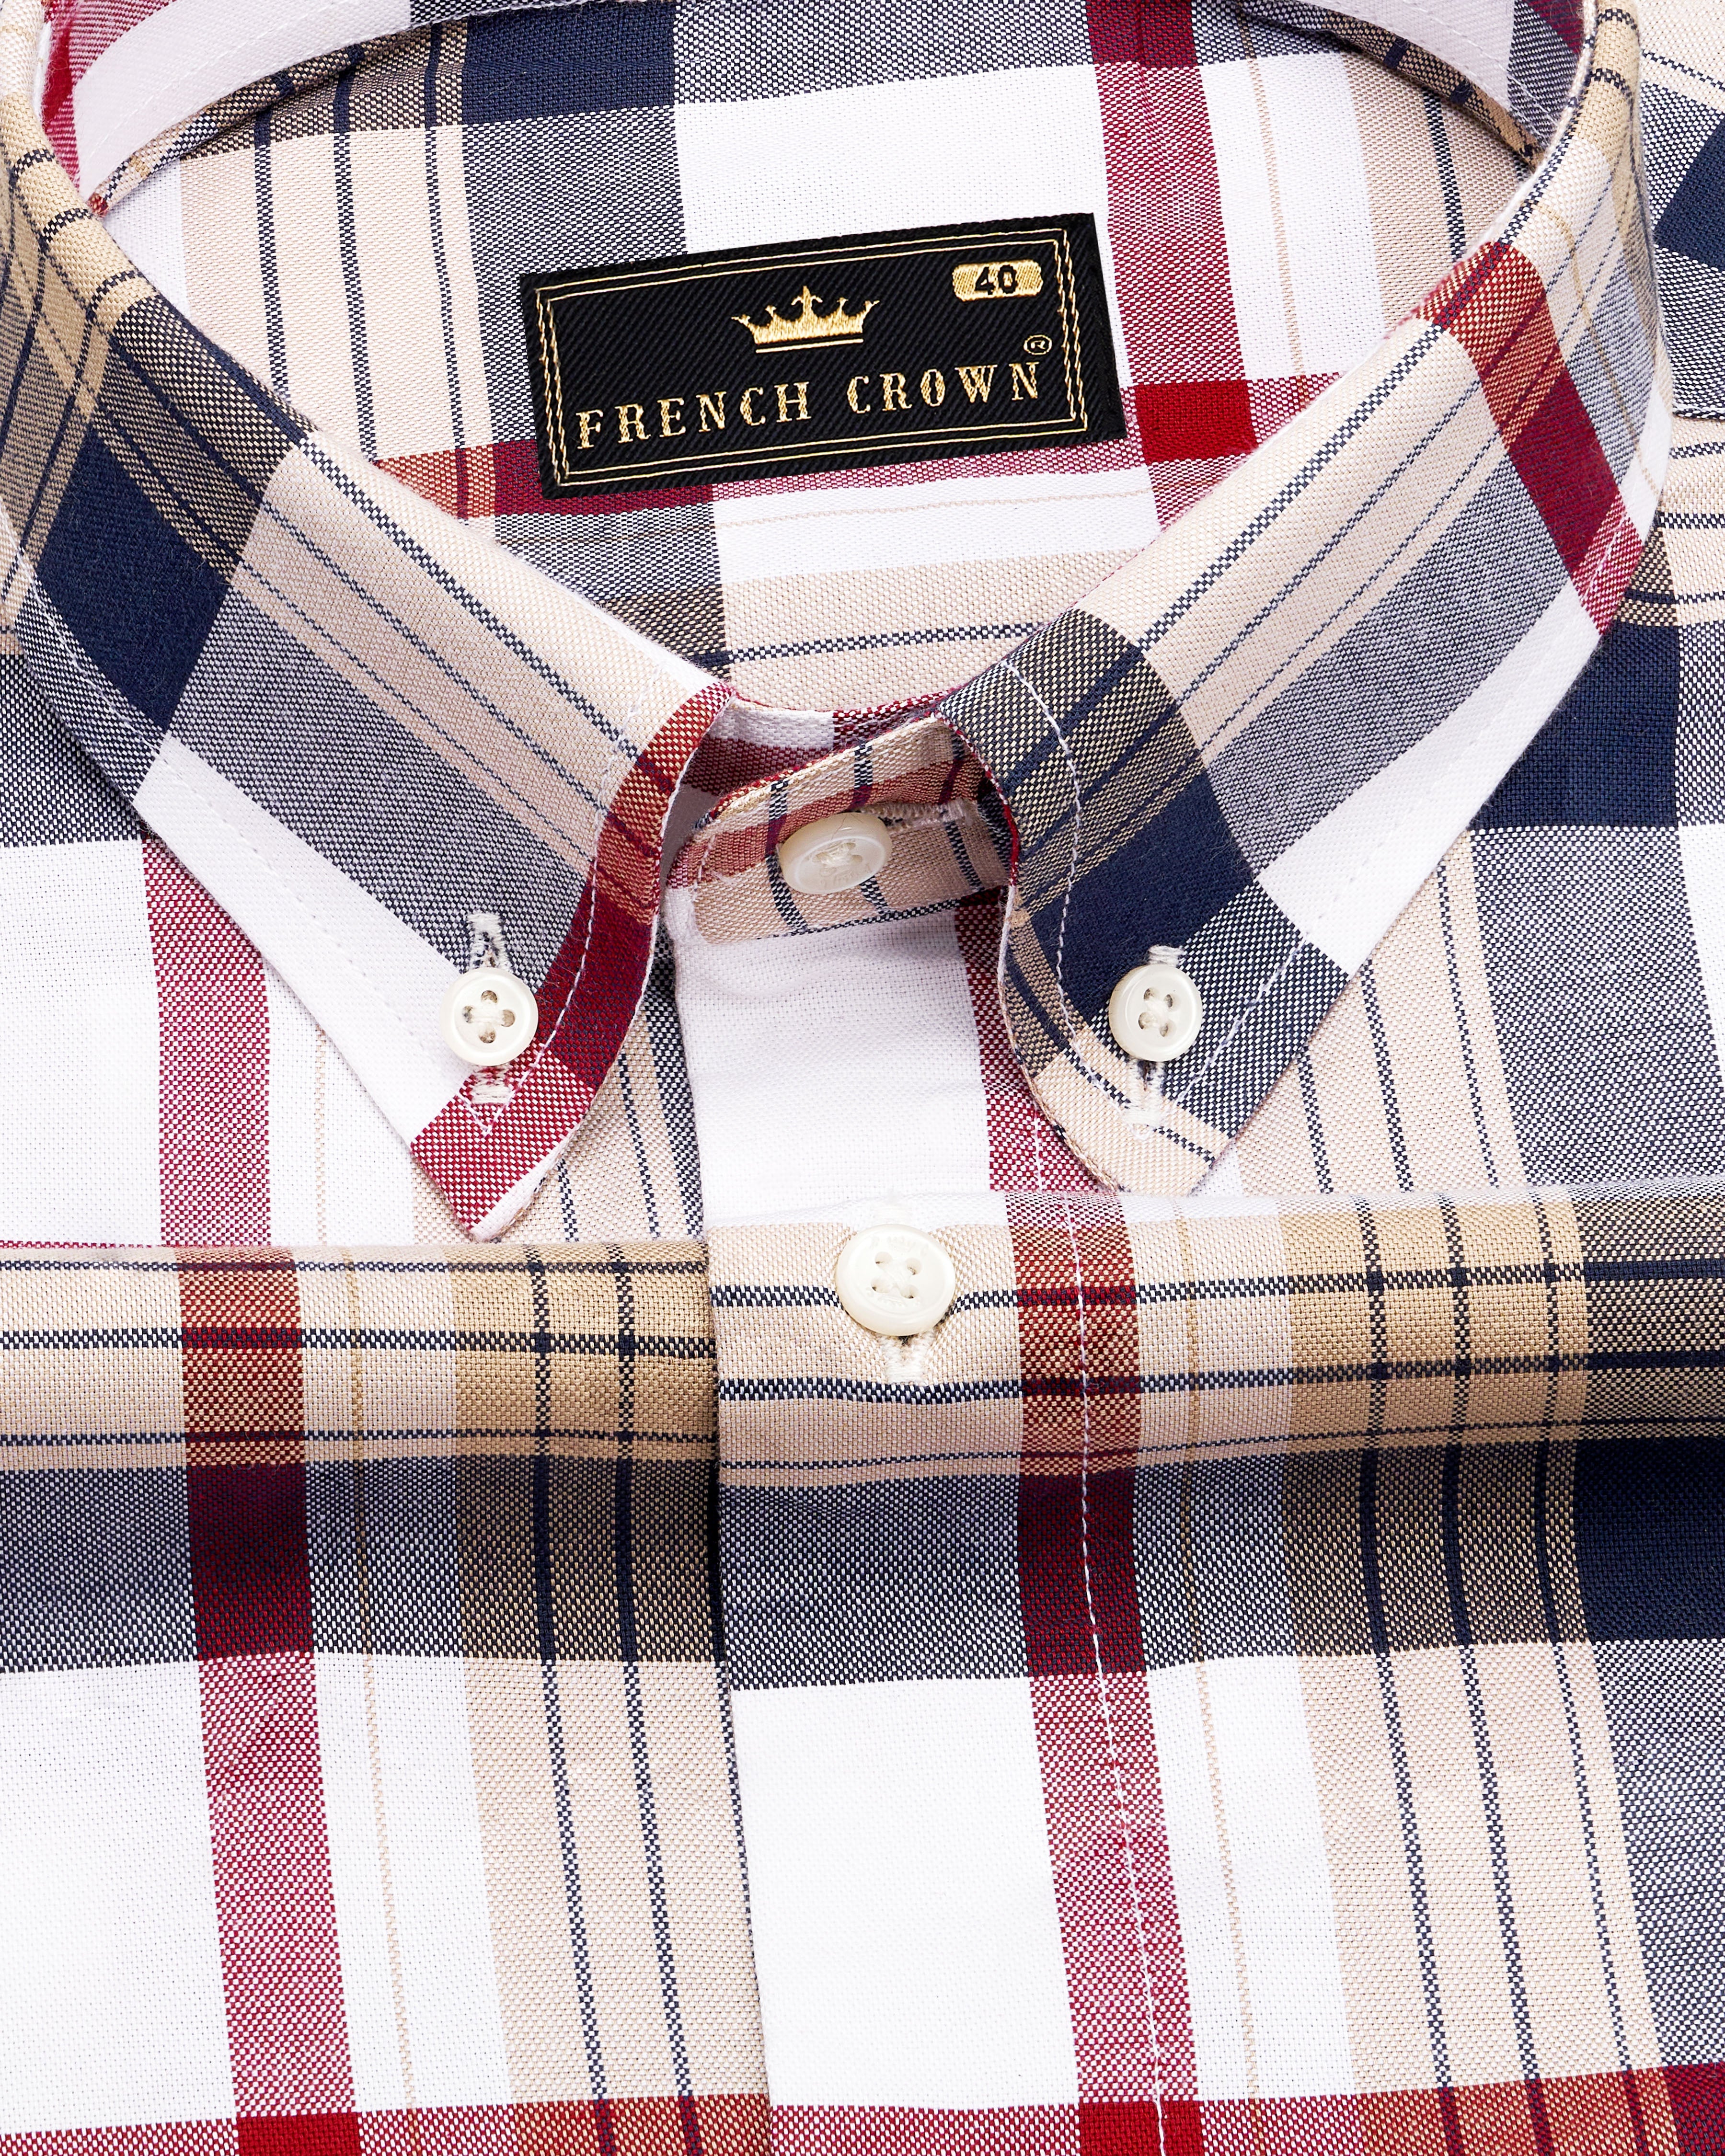 Bright White with Ebony Clay Blue and Pale Taupe Brown Plaid Royal Oxford Shirt 9252-BD-38,9252-BD-H-38,9252-BD-39,9252-BD-H-39,9252-BD-40,9252-BD-H-40,9252-BD-42,9252-BD-H-42,9252-BD-44,9252-BD-H-44,9252-BD-46,9252-BD-H-46,9252-BD-48,9252-BD-H-48,9252-BD-50,9252-BD-H-50,9252-BD-52,9252-BD-H-52